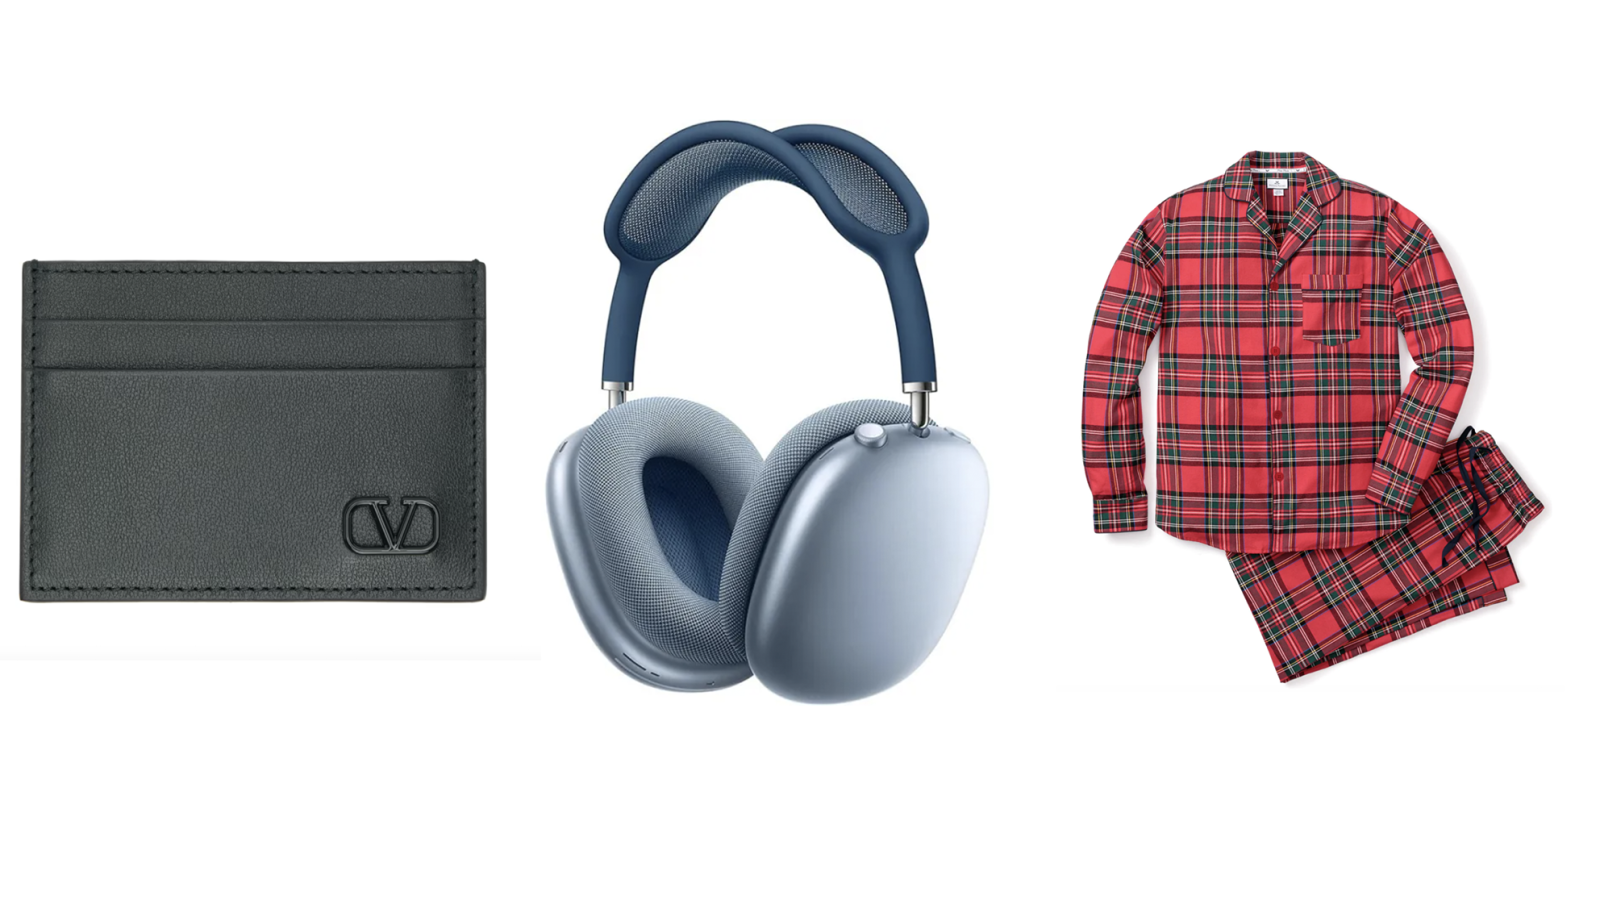 42 Editor-Approved Men's Gifts on Sale for Black Friday